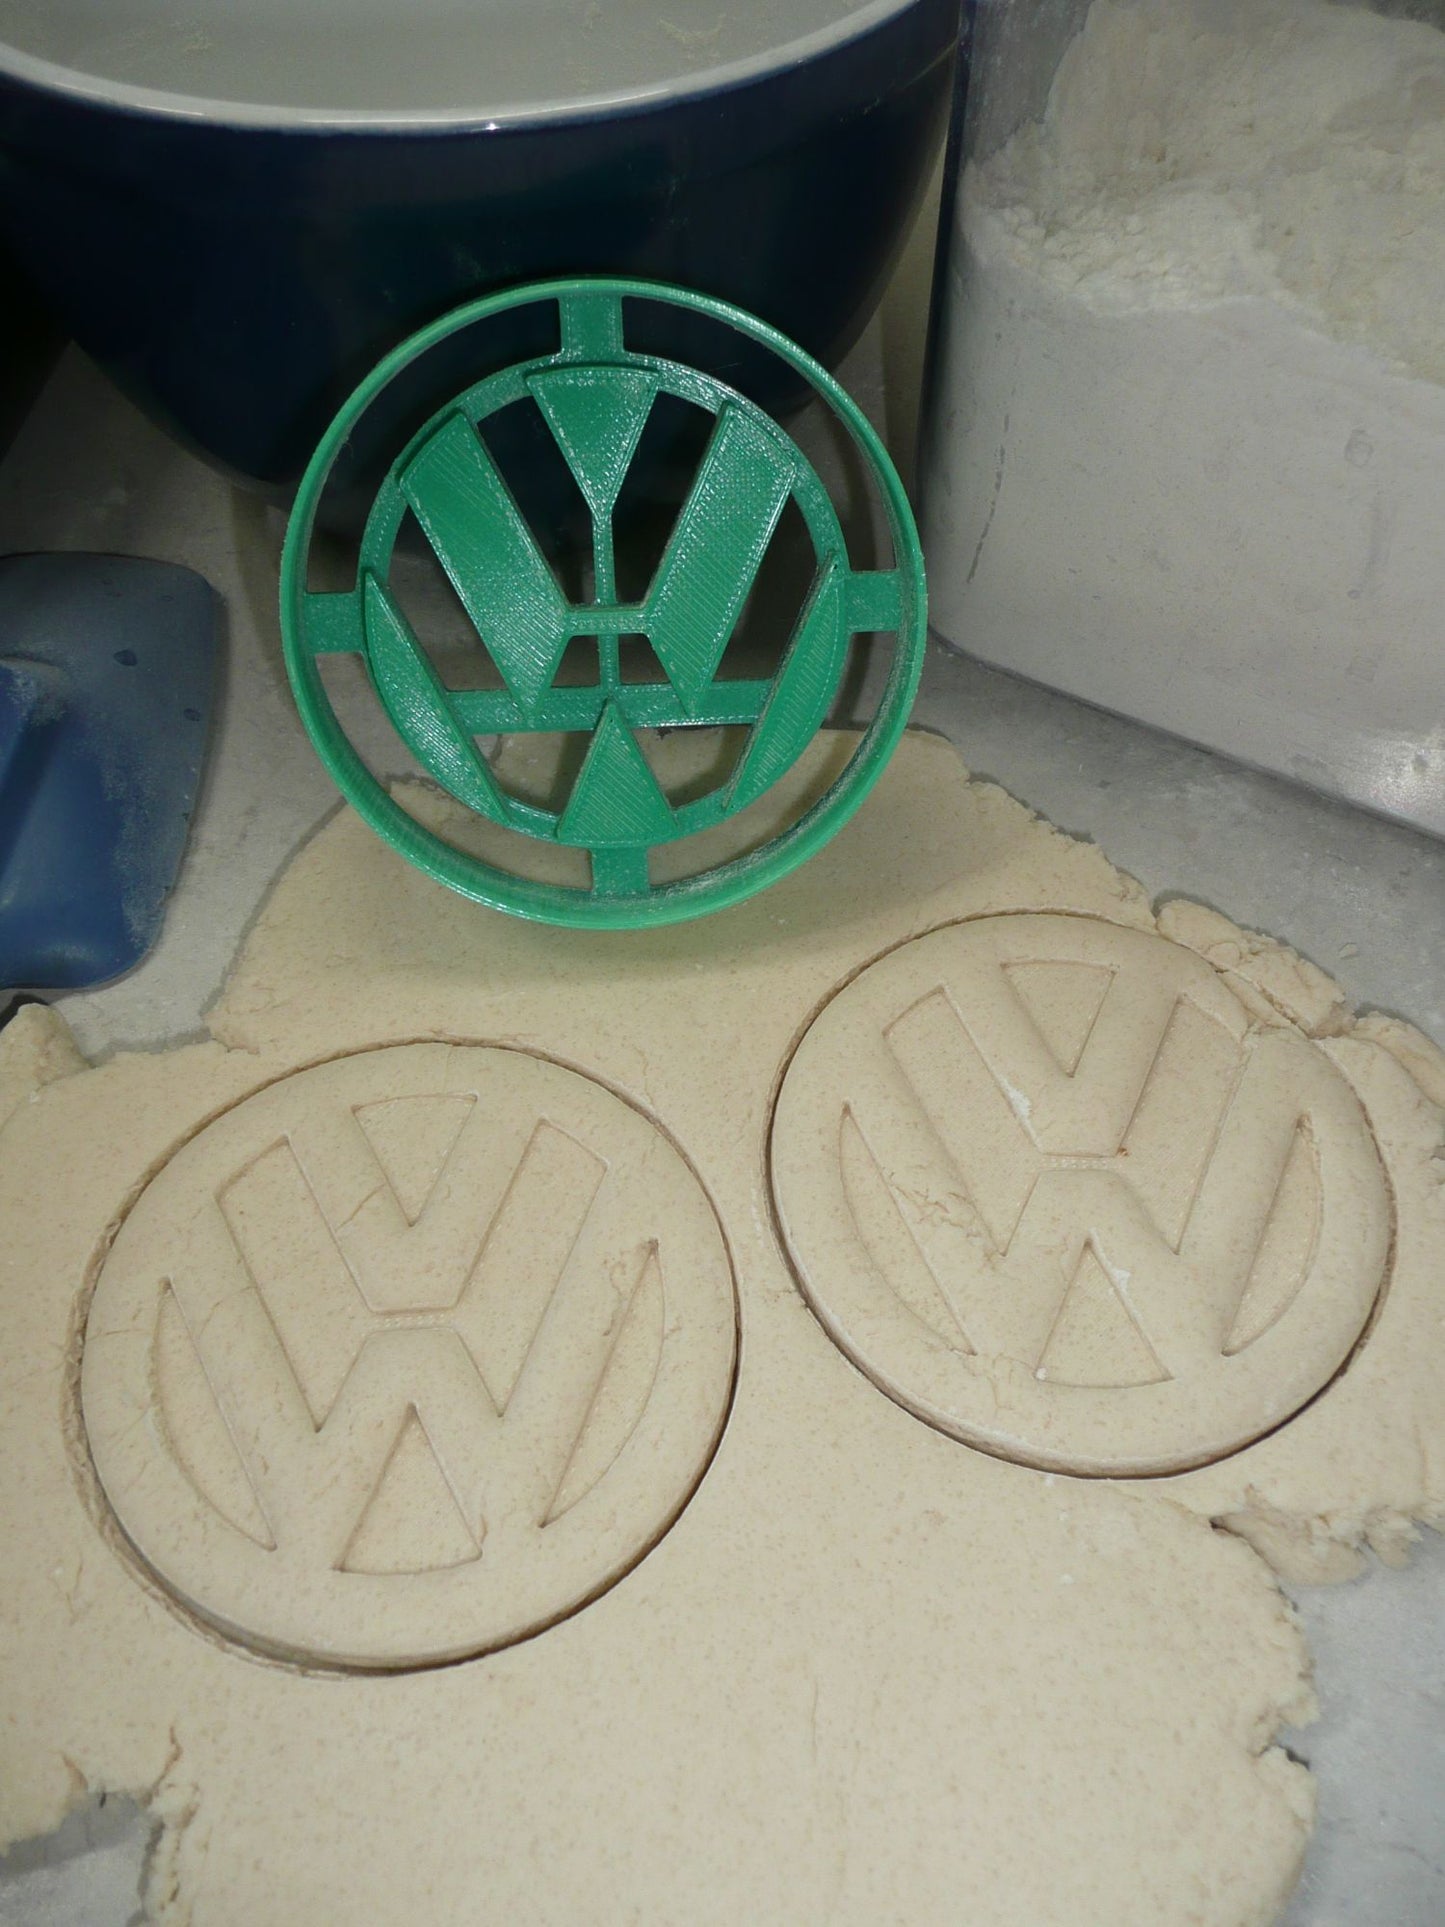 VW Volkswagon Luxury Vehicle Iconic Symbol Cookie Cutter Made In USA PR4543